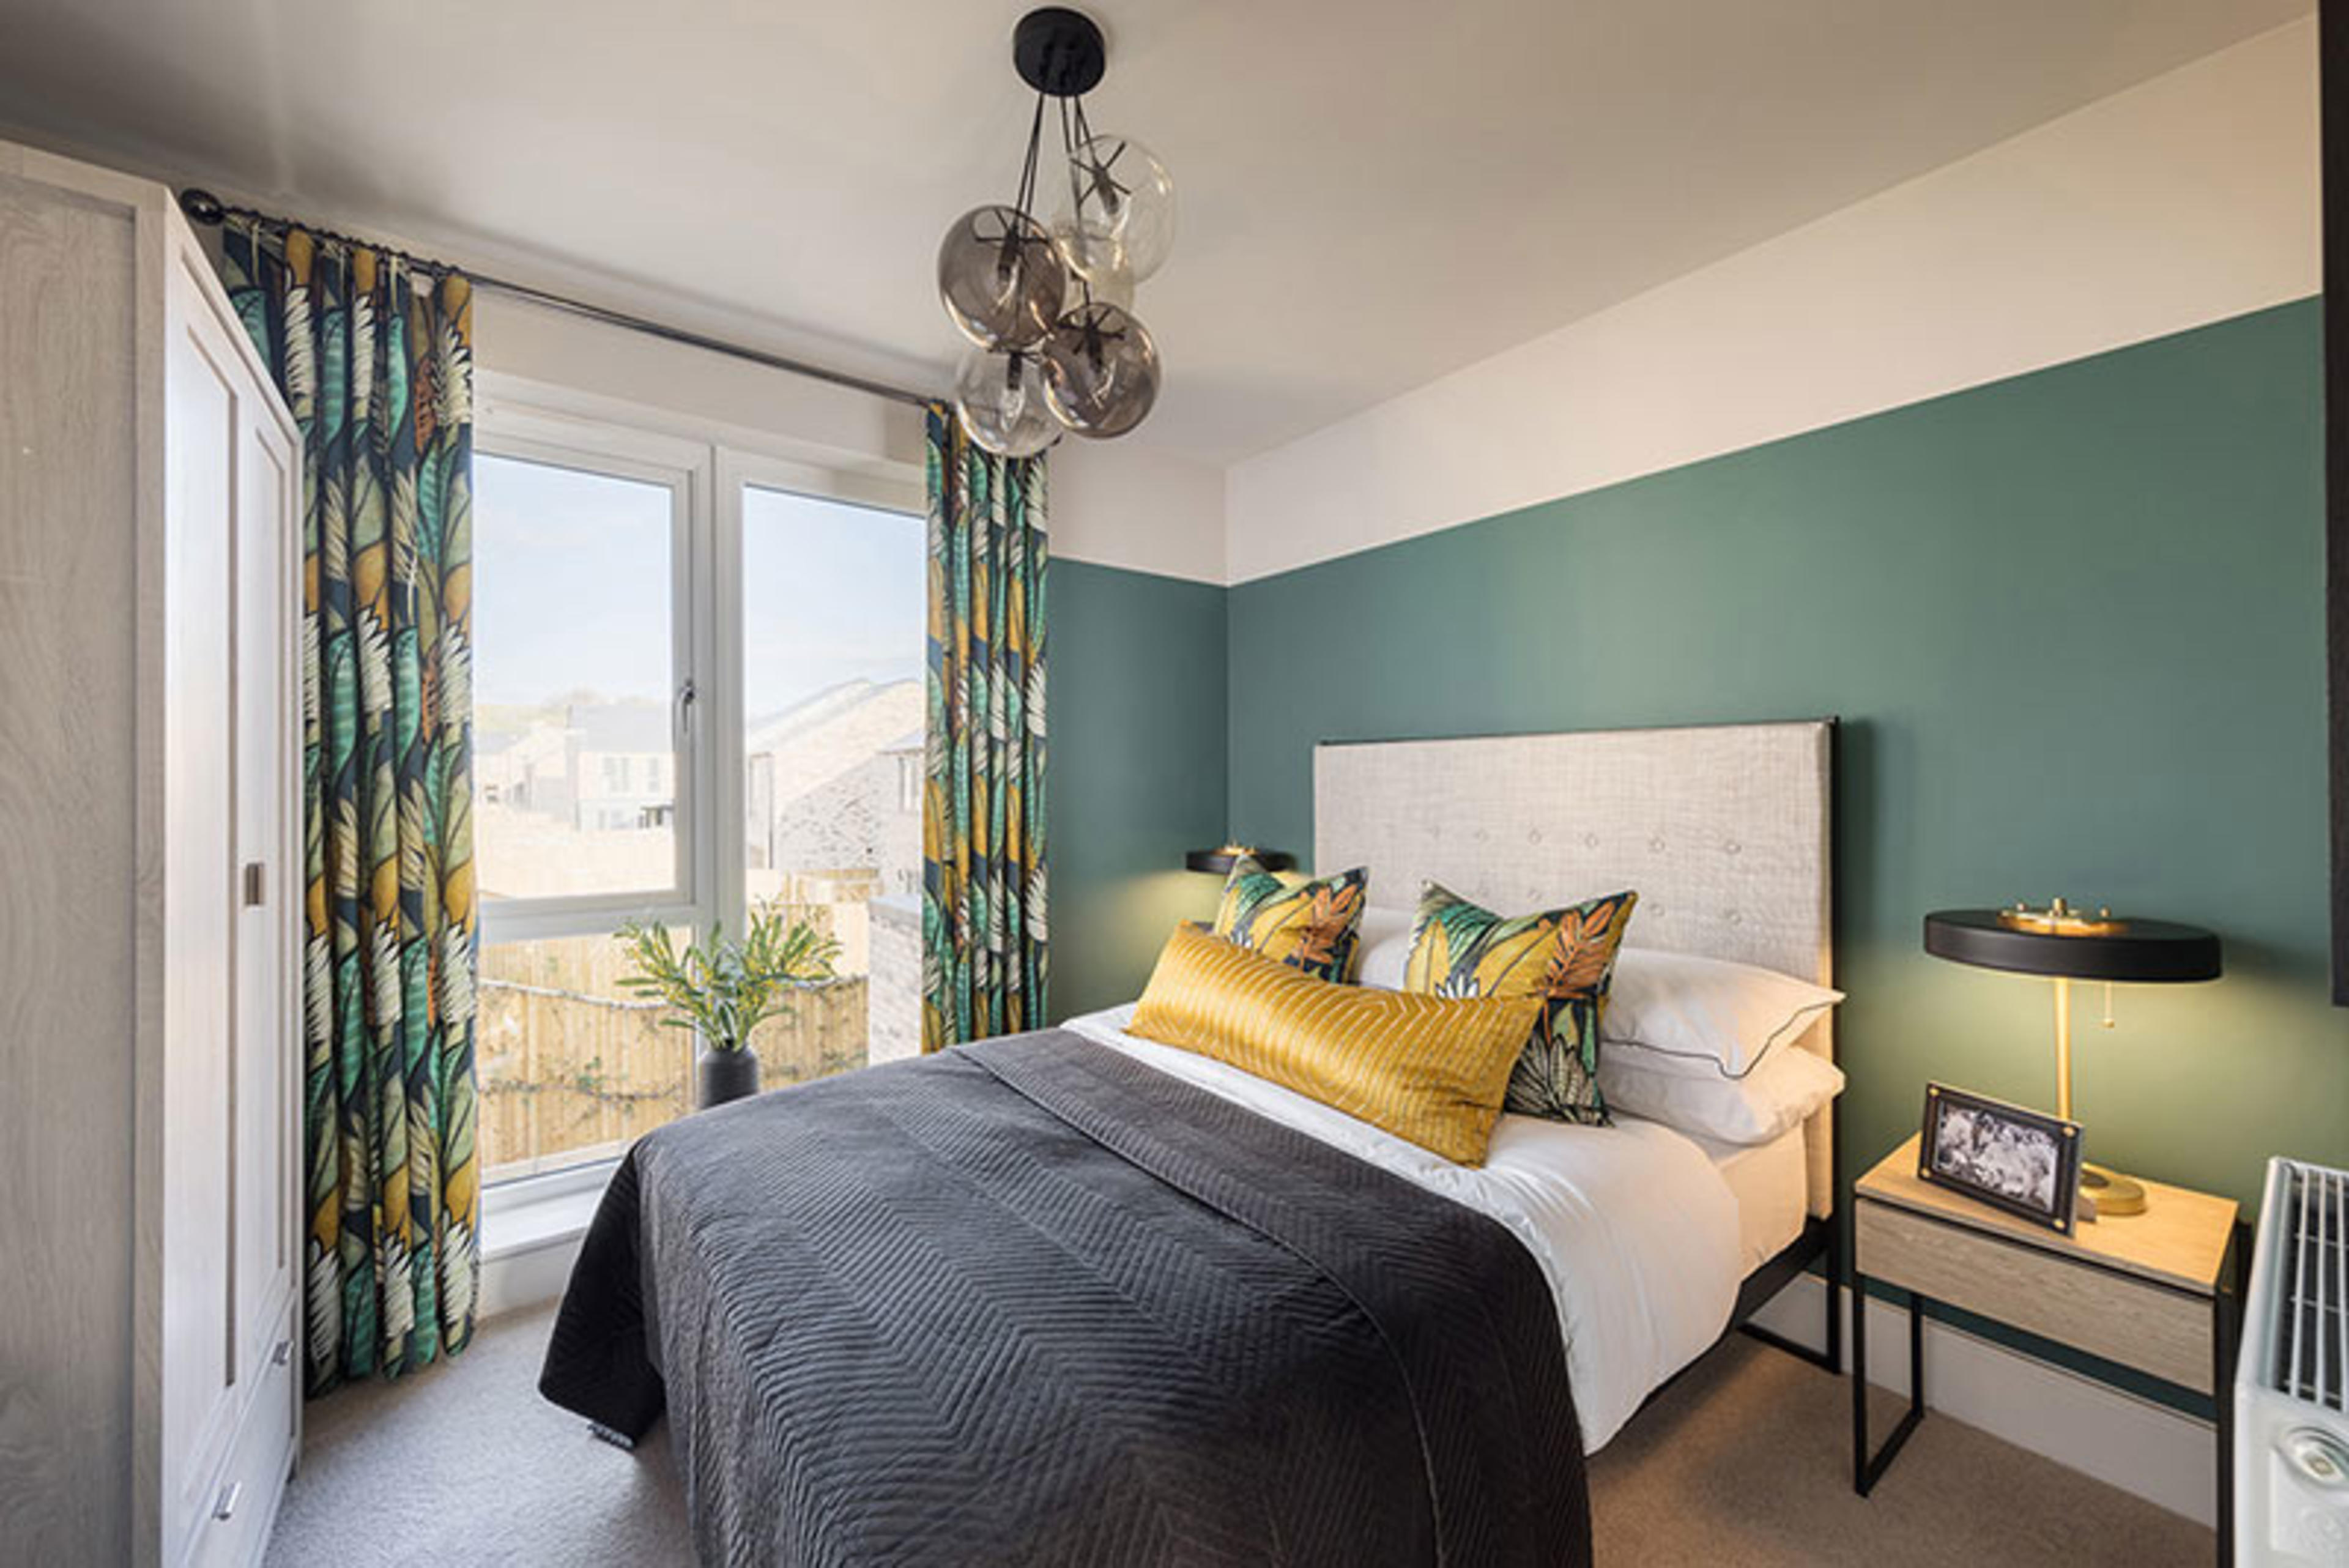 A bedroom with green walls and curtains containing a wardrobe and a double bed with green and yellow pillows 